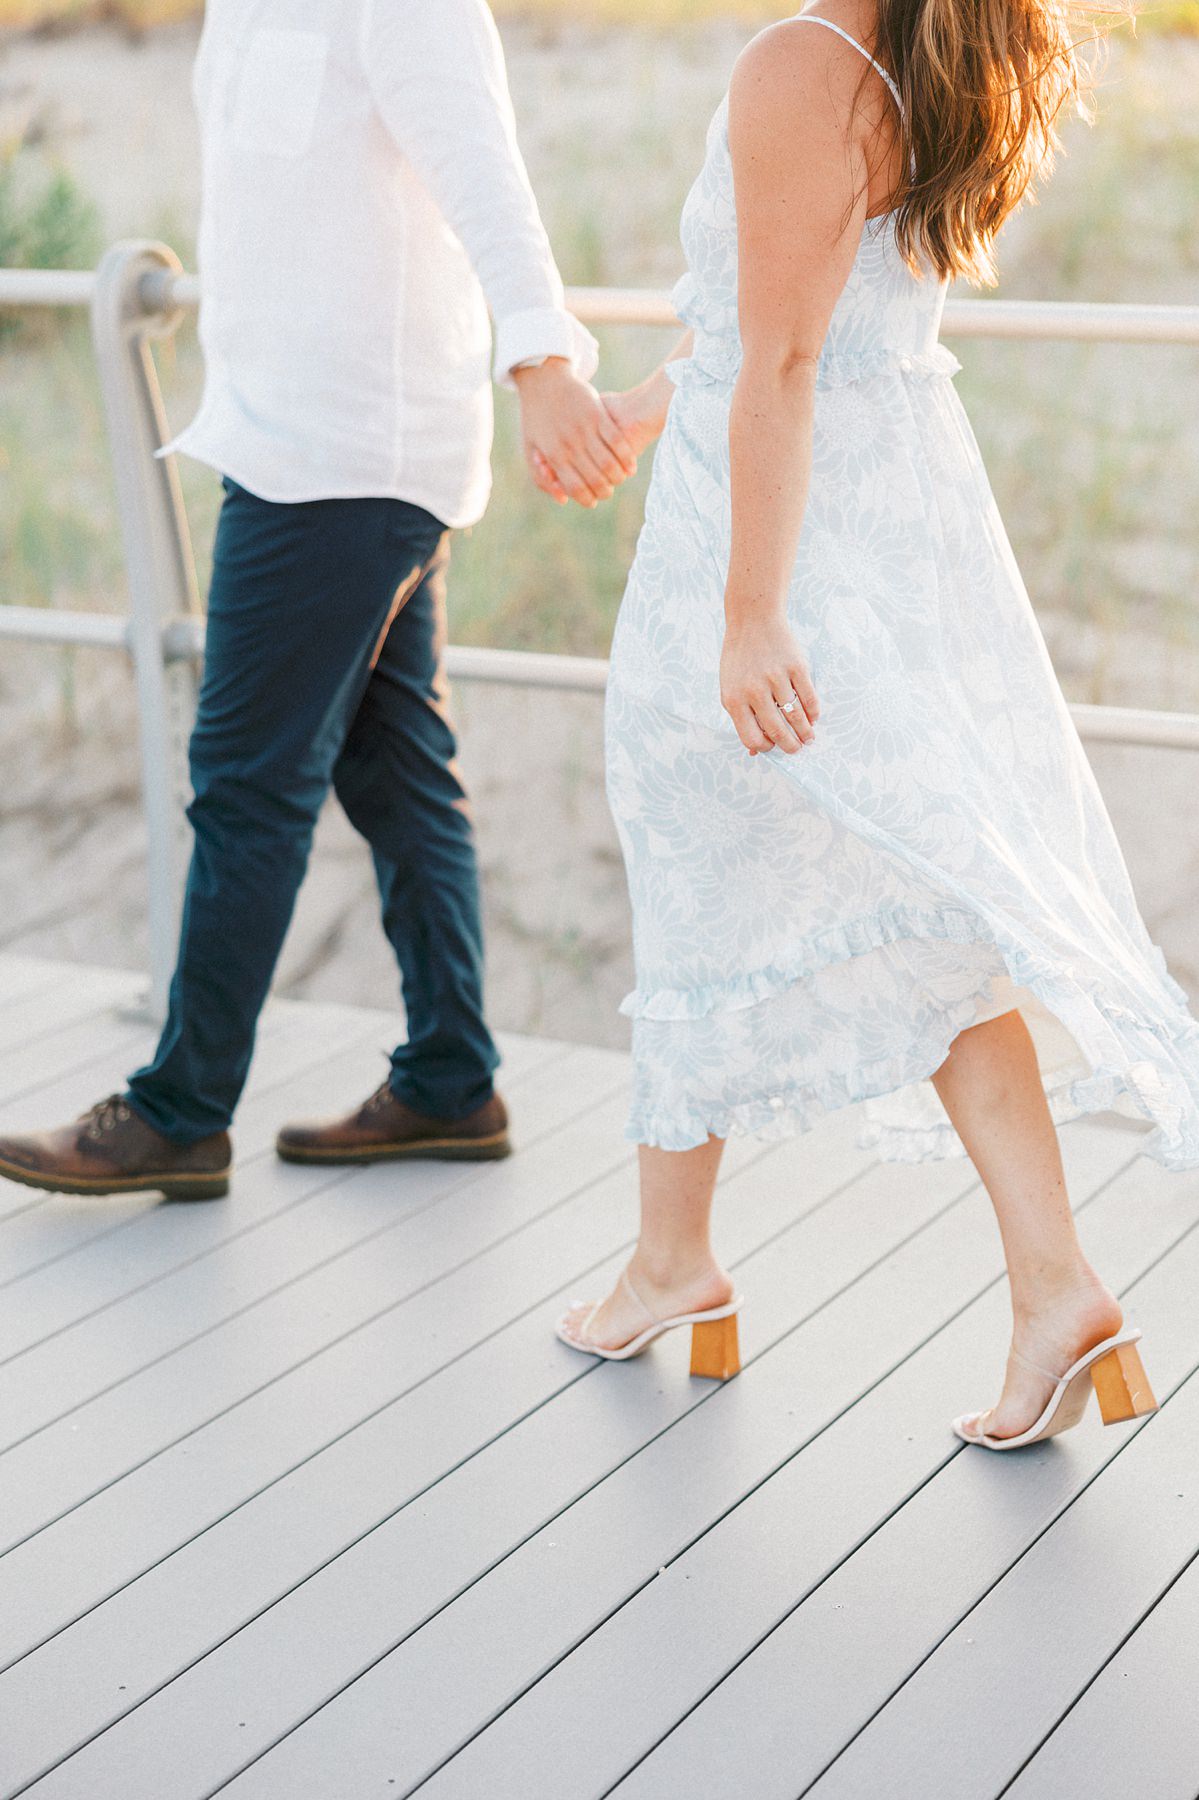 What to Wear for Your Engagement Photos